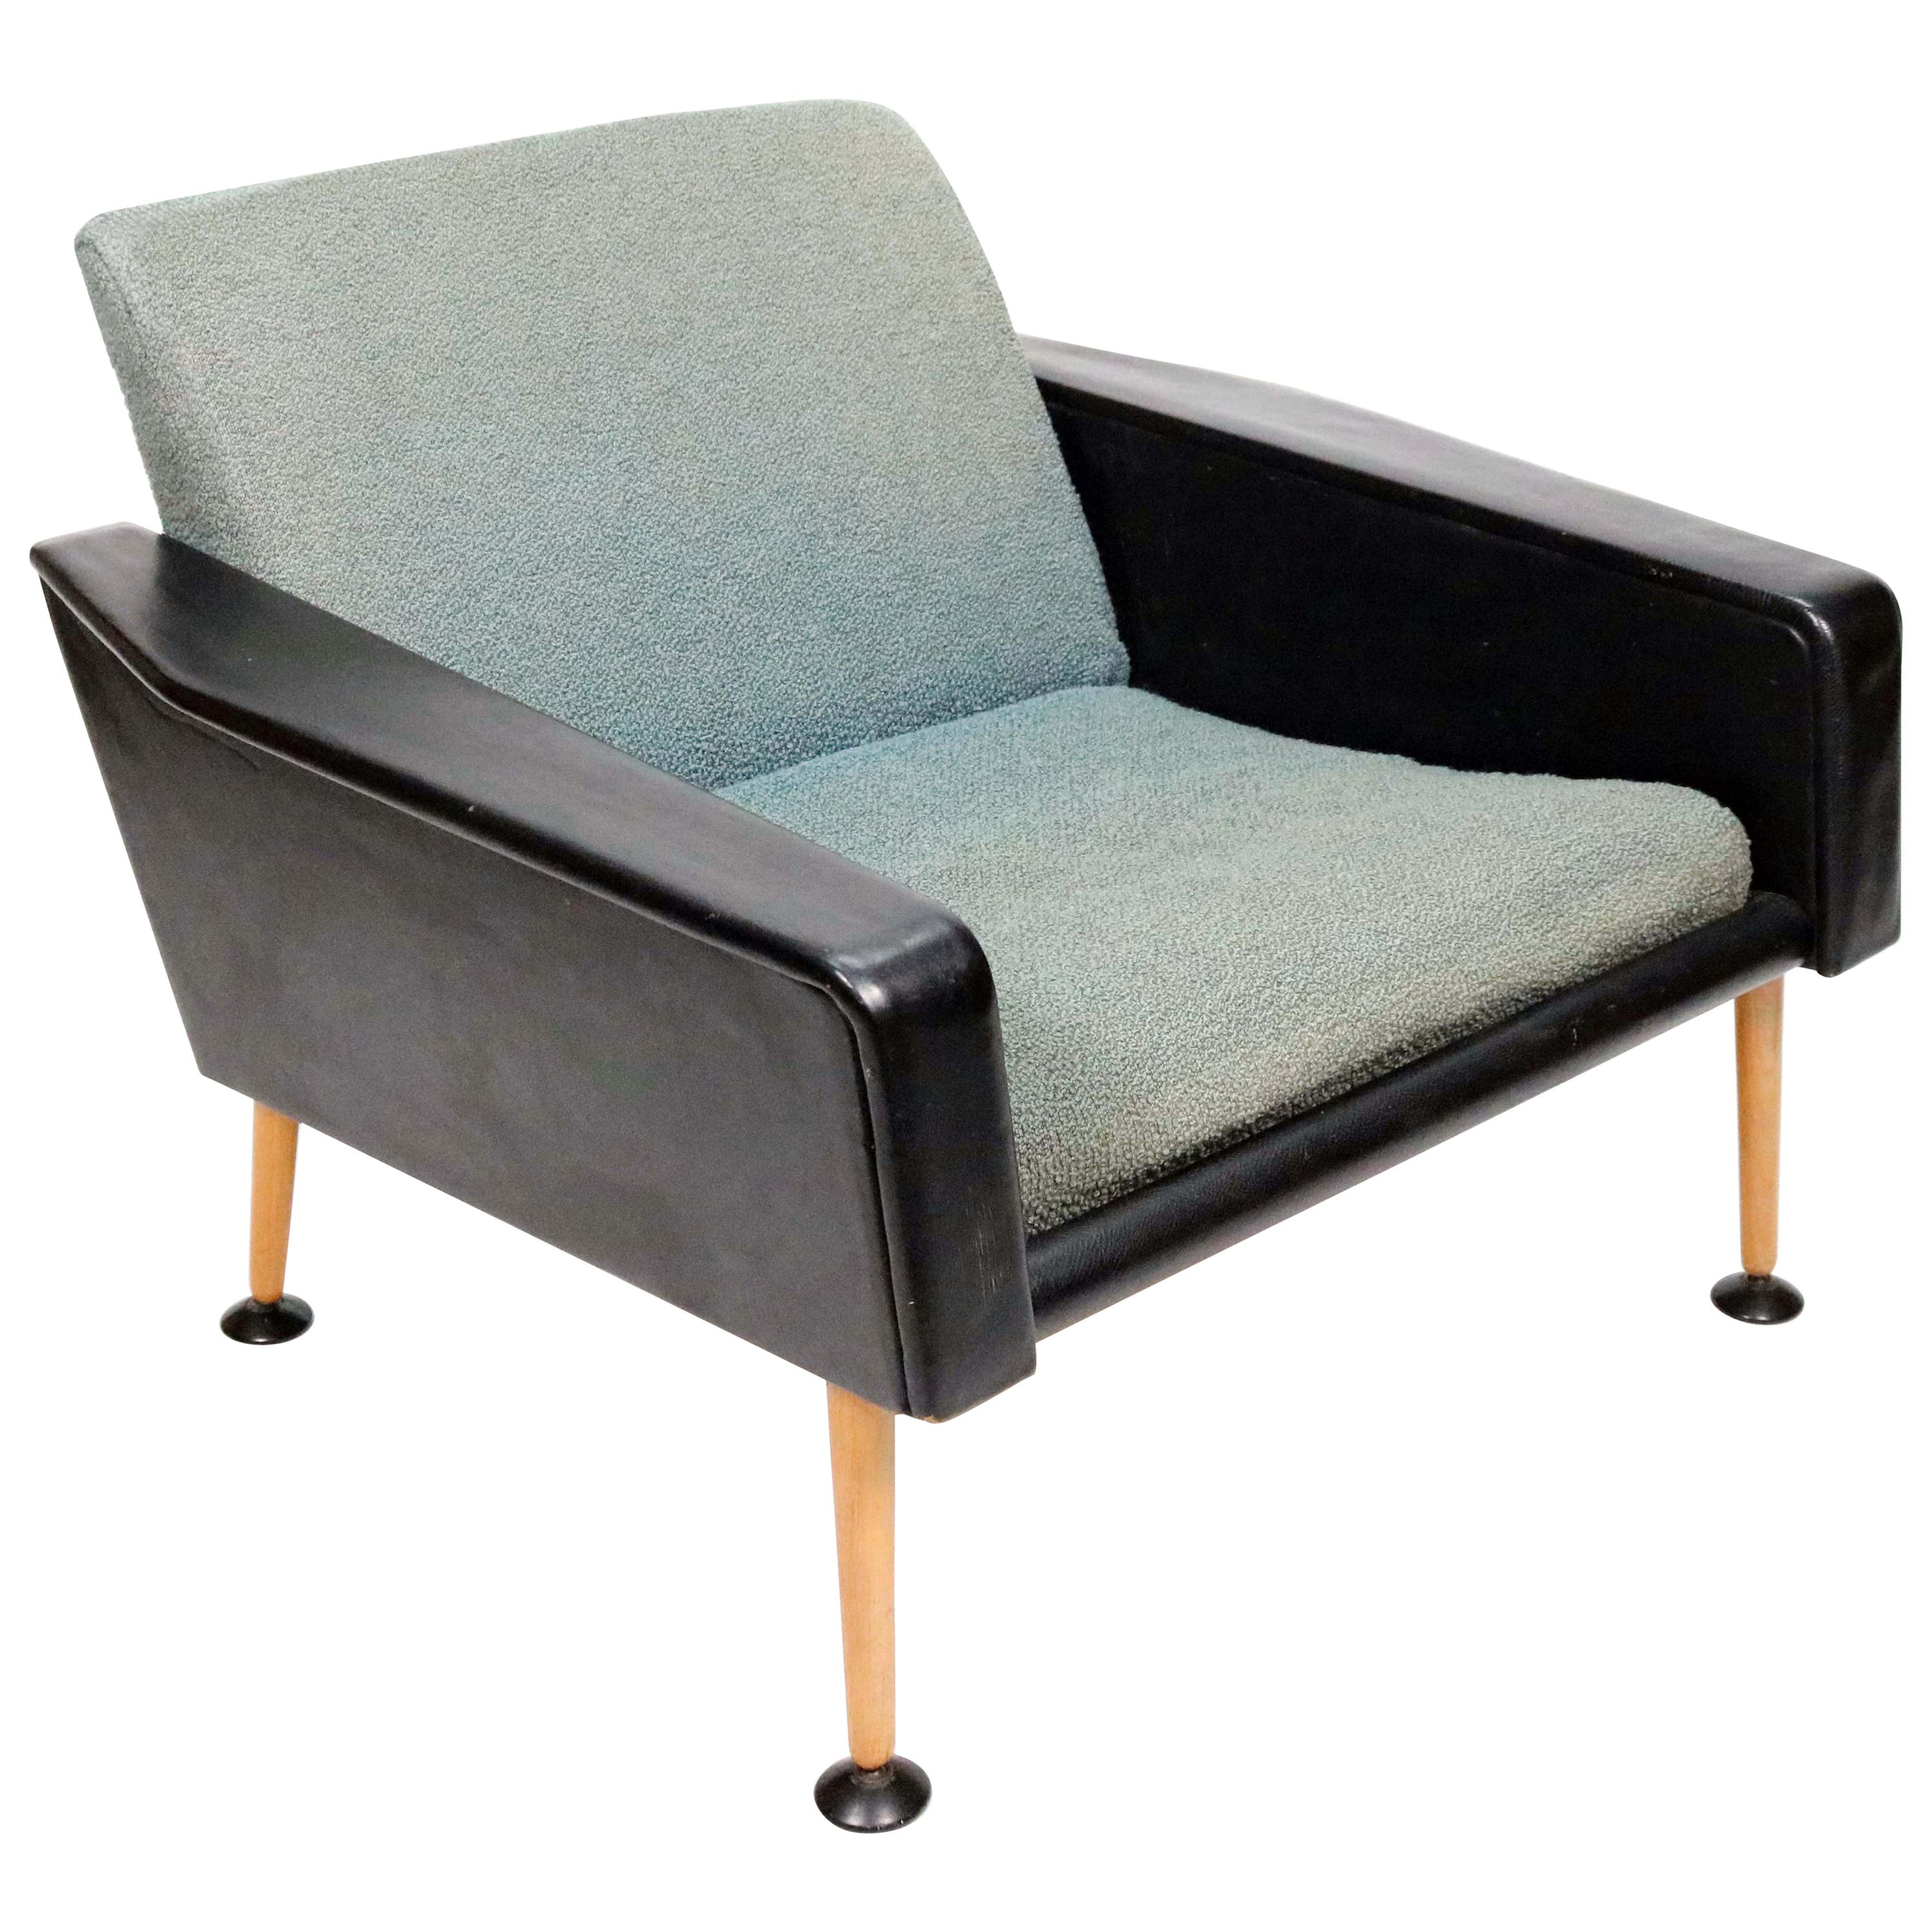 Model R57 Lounge Chair by Ernest Race for Race Furniture, Ltd